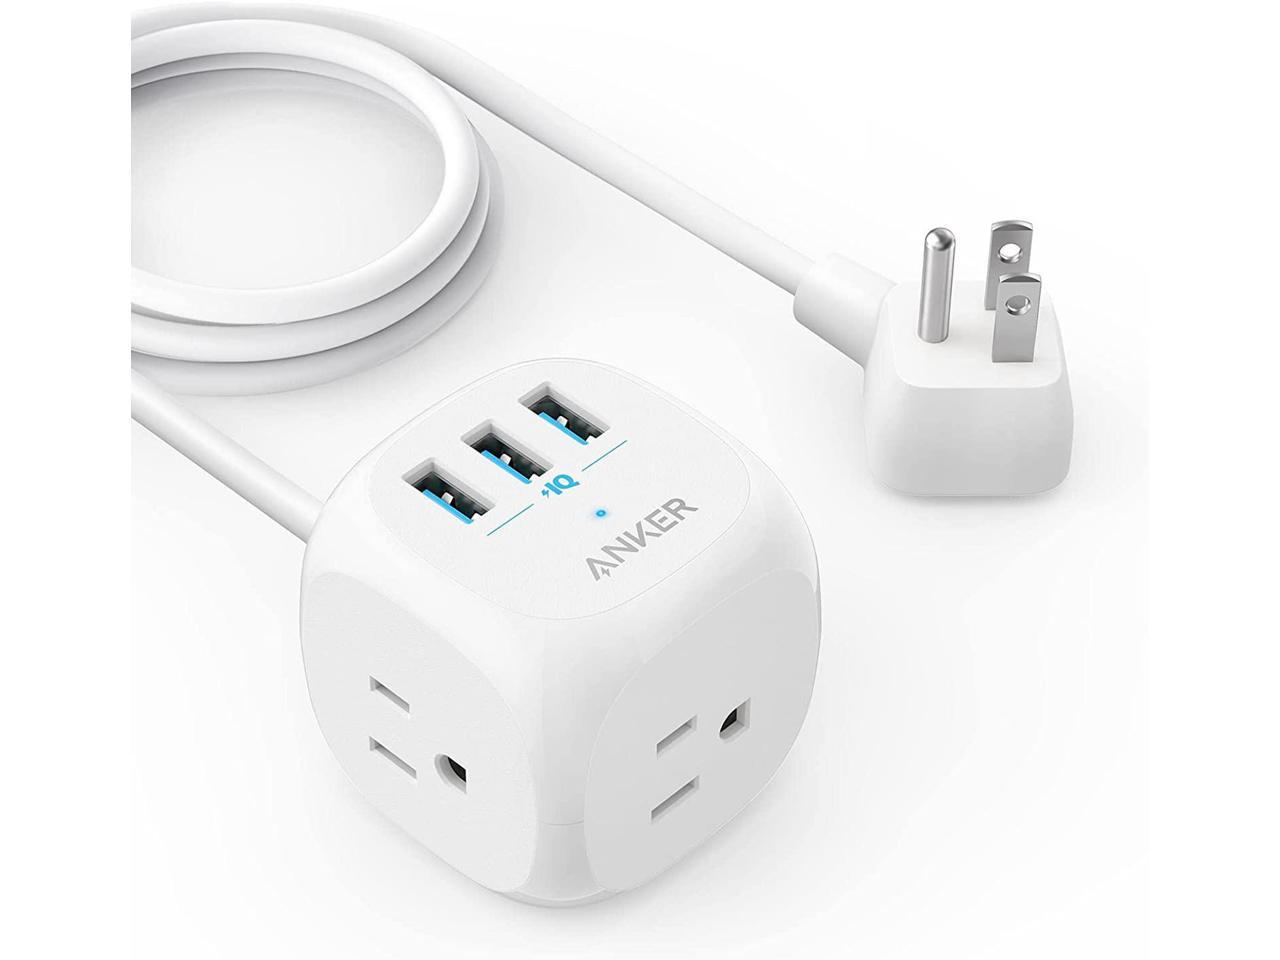 2Way Power Strip+3 USB ports with wireless charger Cube Extension Lead with USB 